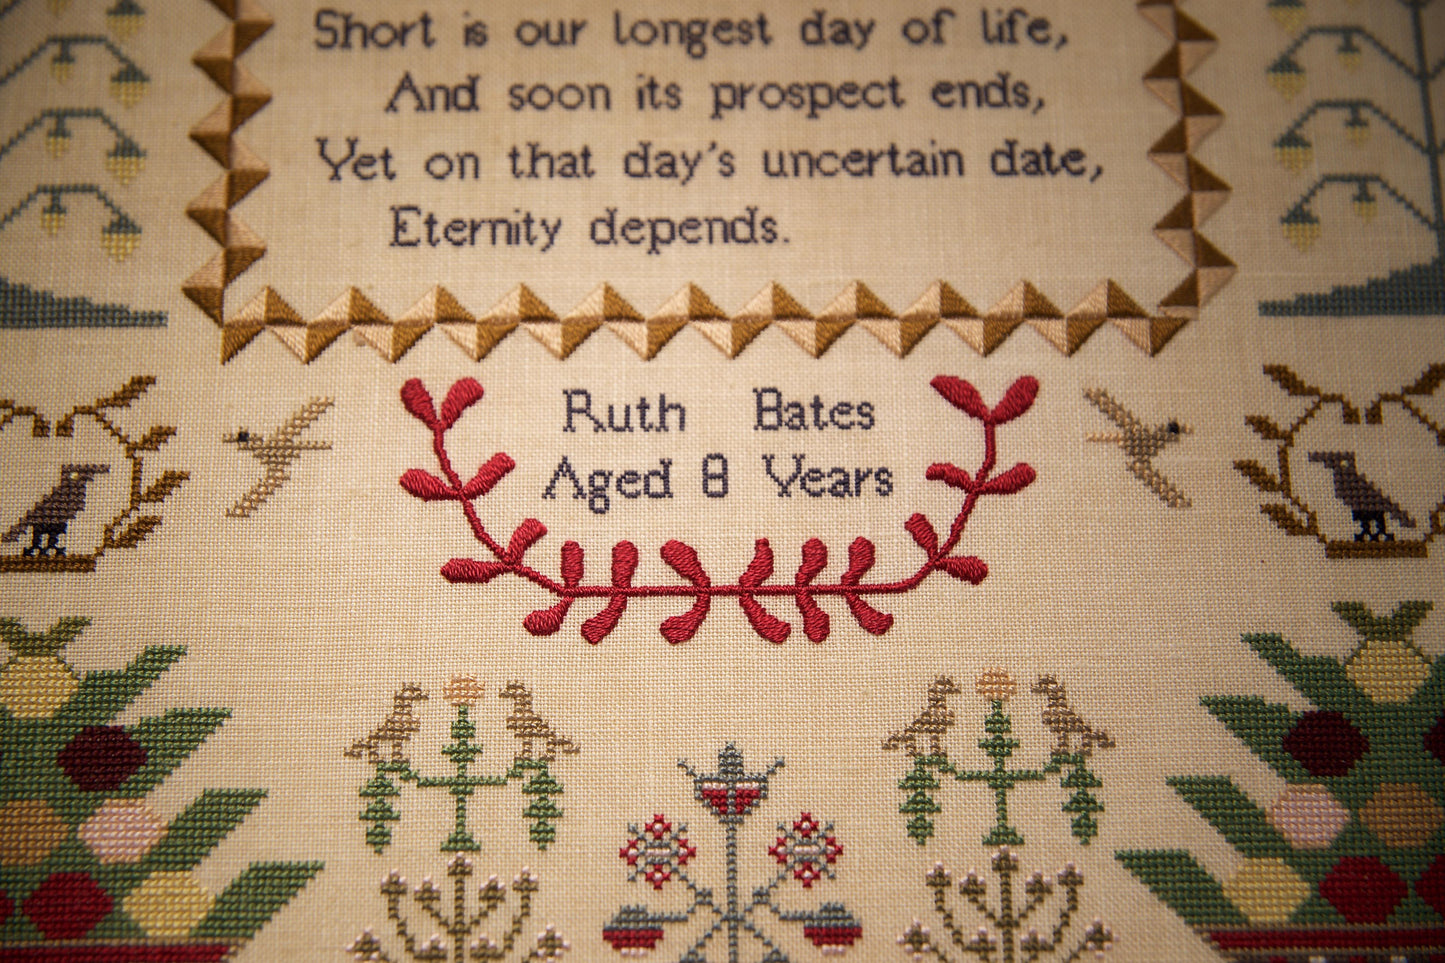 Ruth Bates 1823 ~ Reproduction Sampler Pattern by Hands Across the Sea Samplers